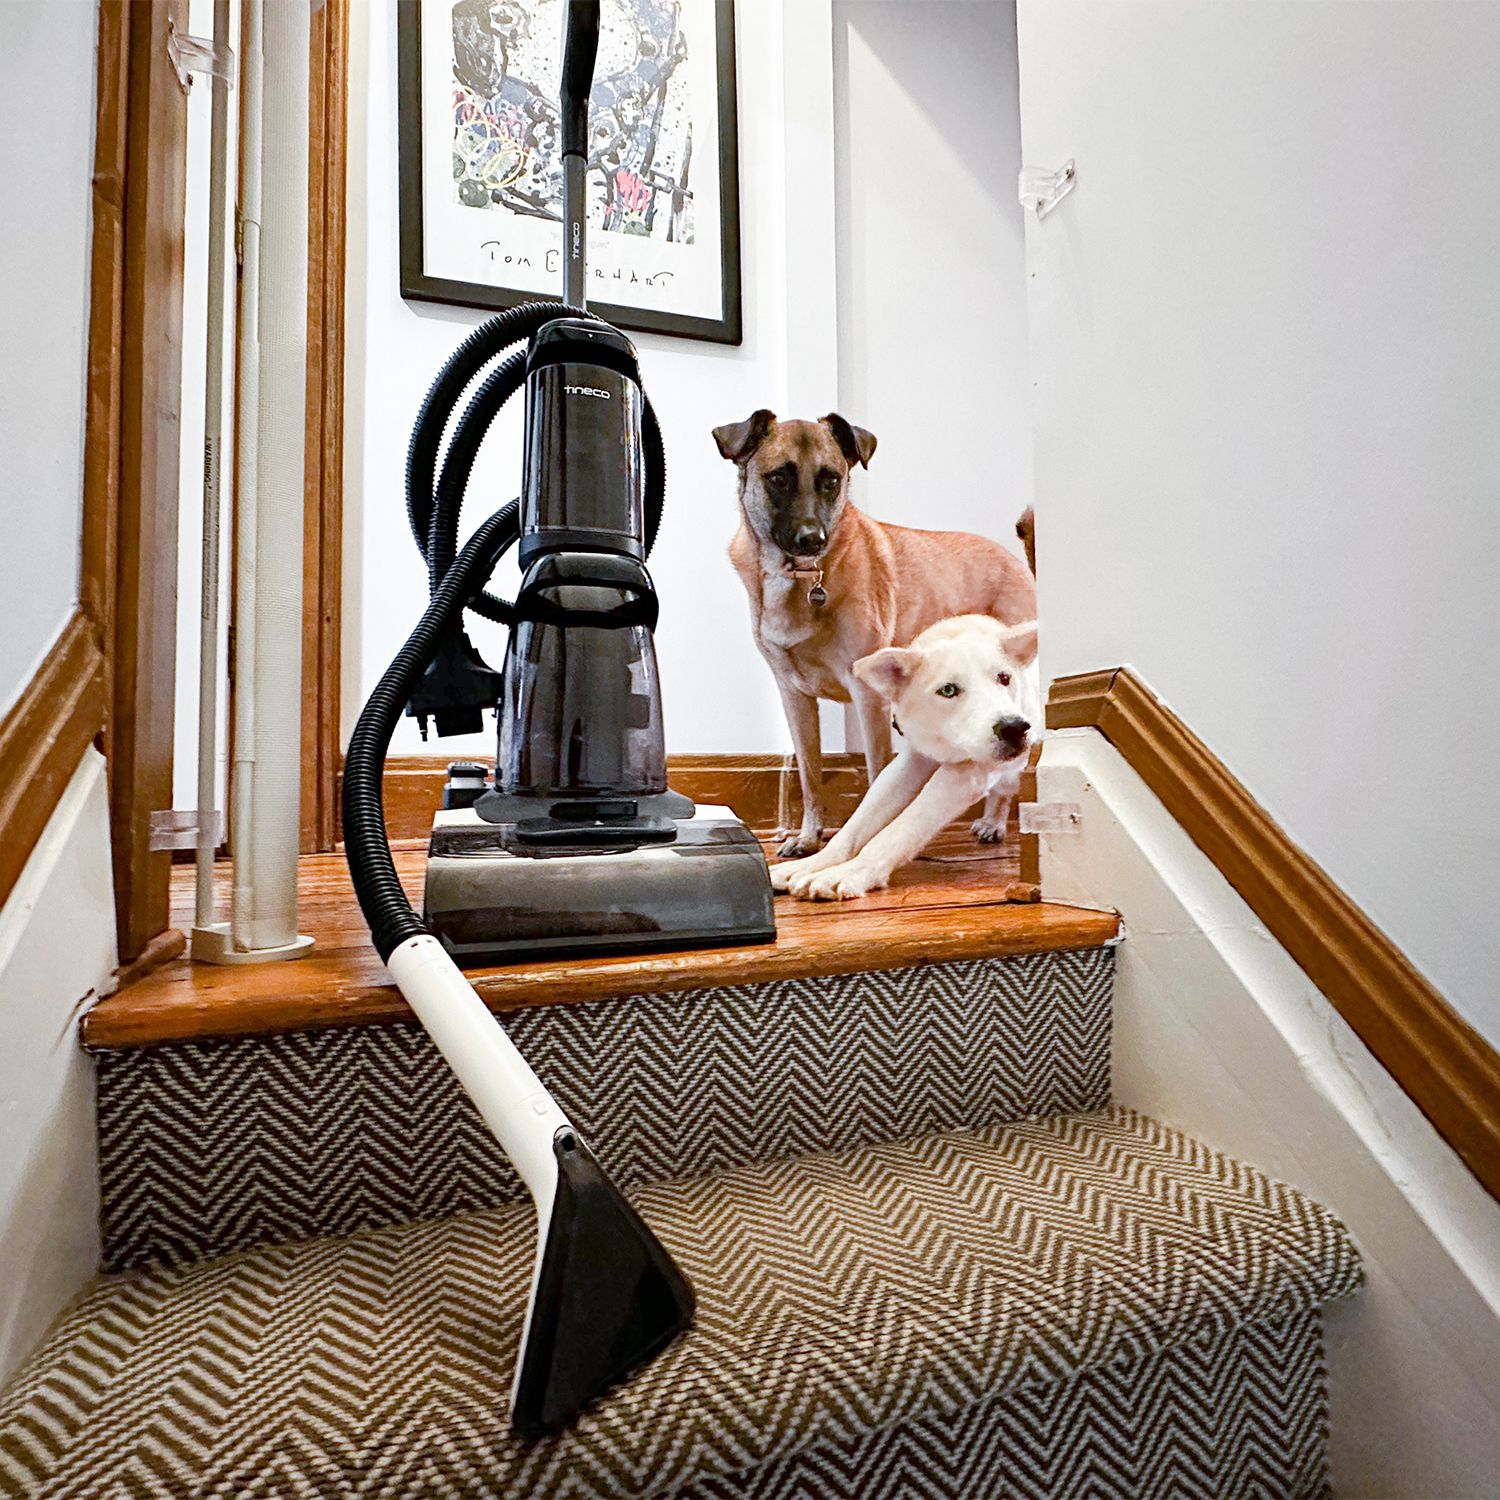 The Best Carpet Cleaners For Pets To